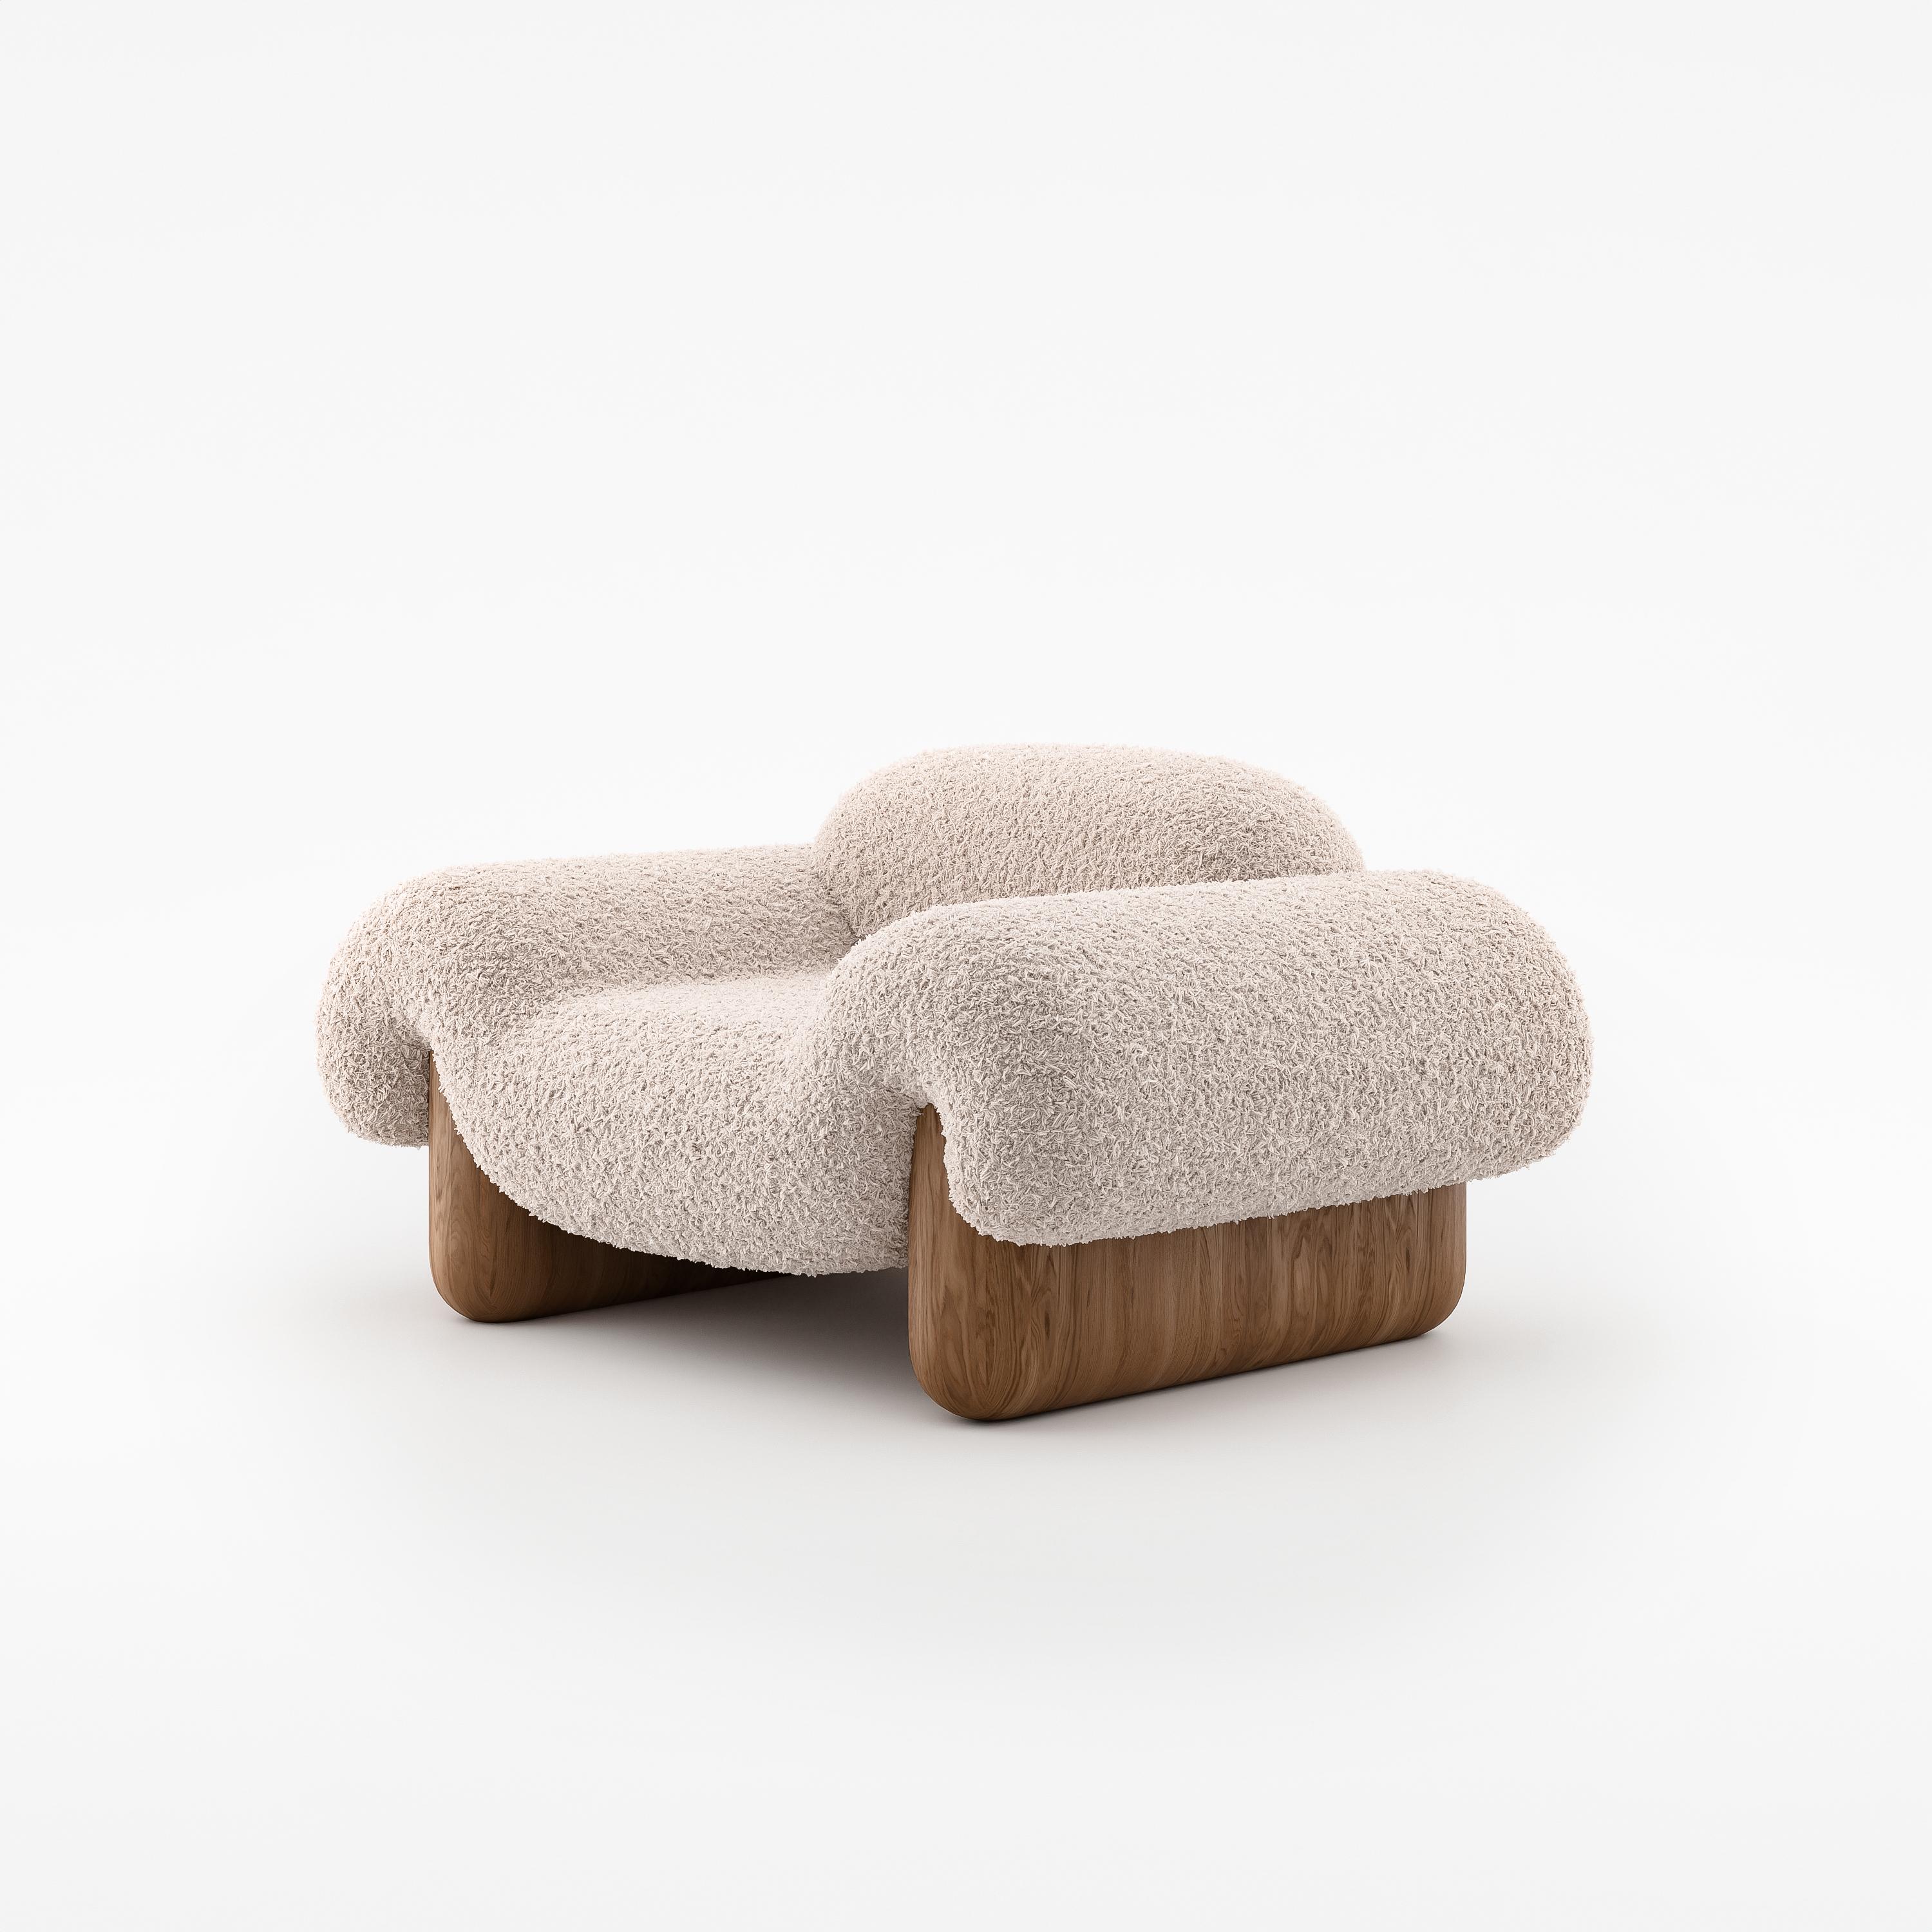 Little Lamb Chair by NUMO
Dimensions: D 124 x W 94 x H 66 cm
Materials: Faux Lamb Fur, Wood
Customizable Size. Please contact us.

 Vladimir Naumov is a professional architect, designer and artist.

While designing the furniture he tries to reach